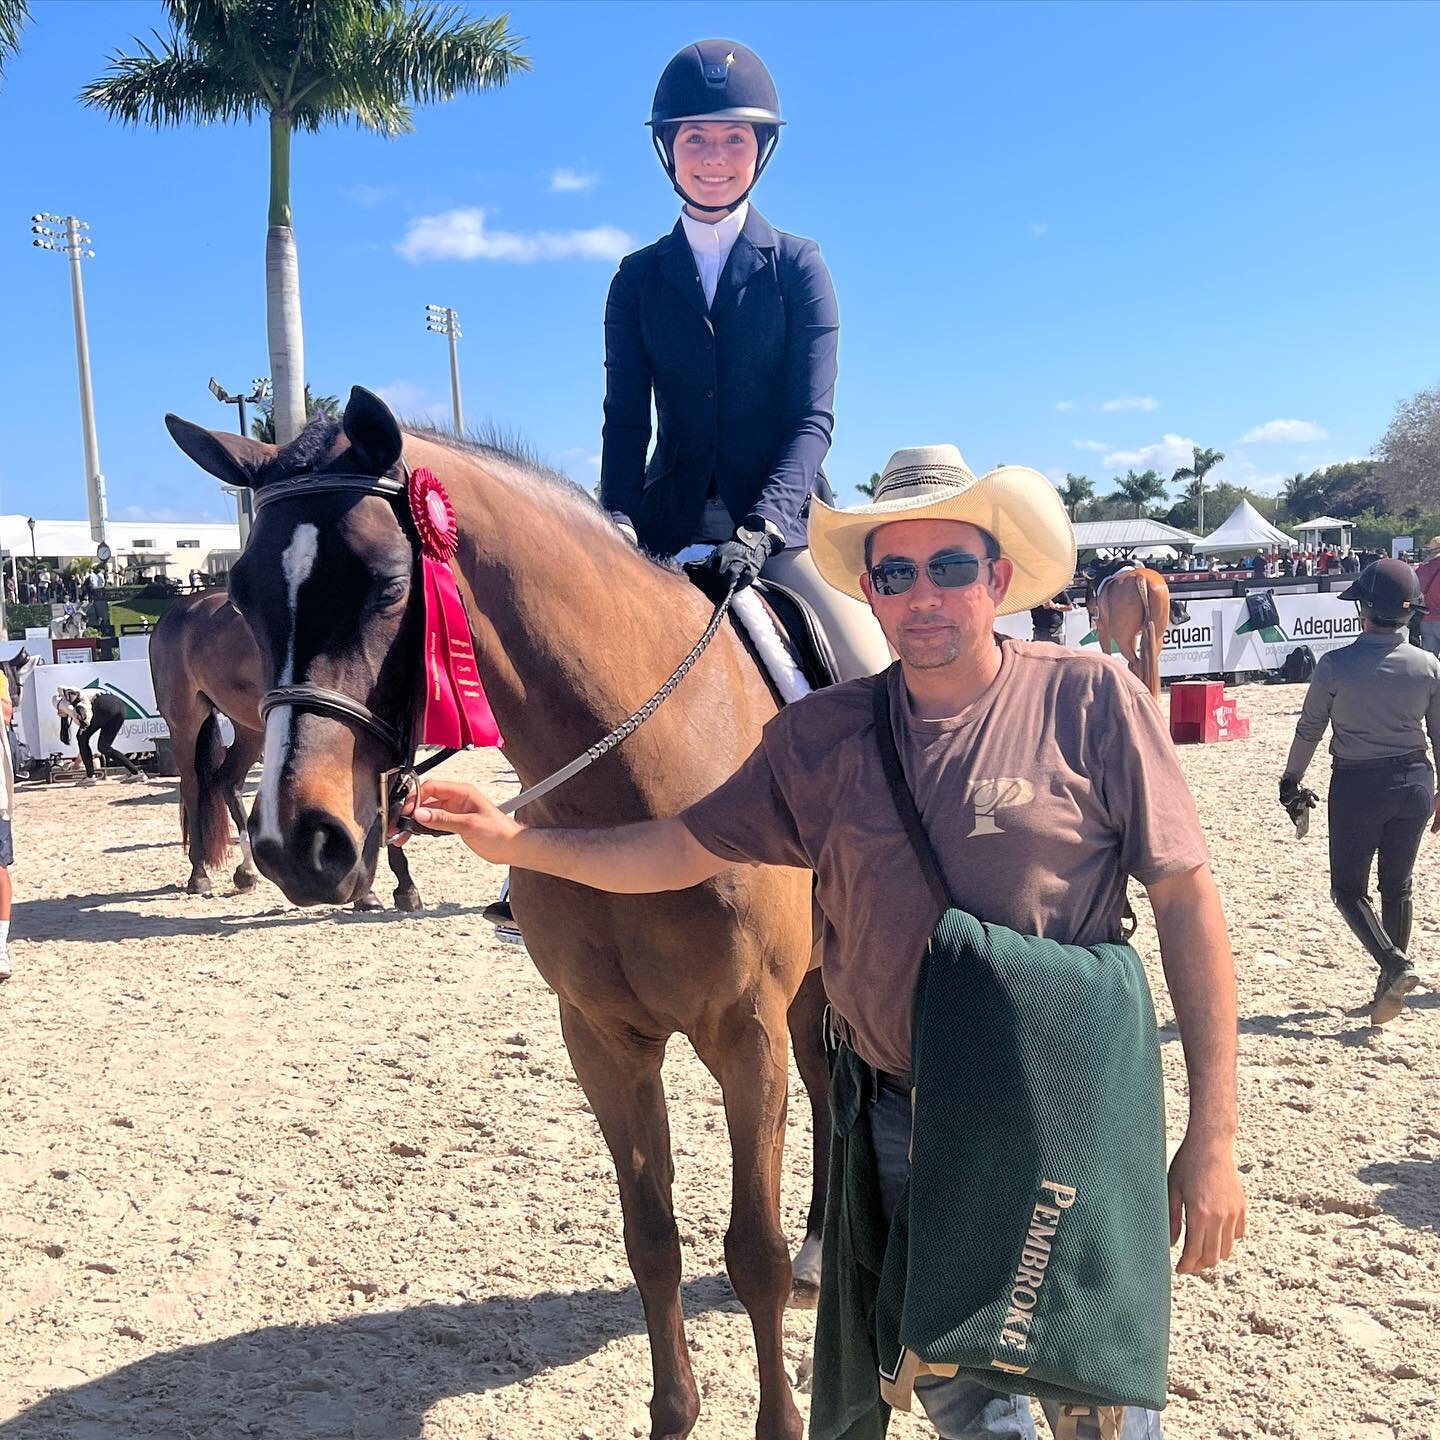 Congratulations to Hannah Amig and her own Castile Le Cade on ended up Reserve Champion in the Low Childrens at WEF 3 out of 35 others!!